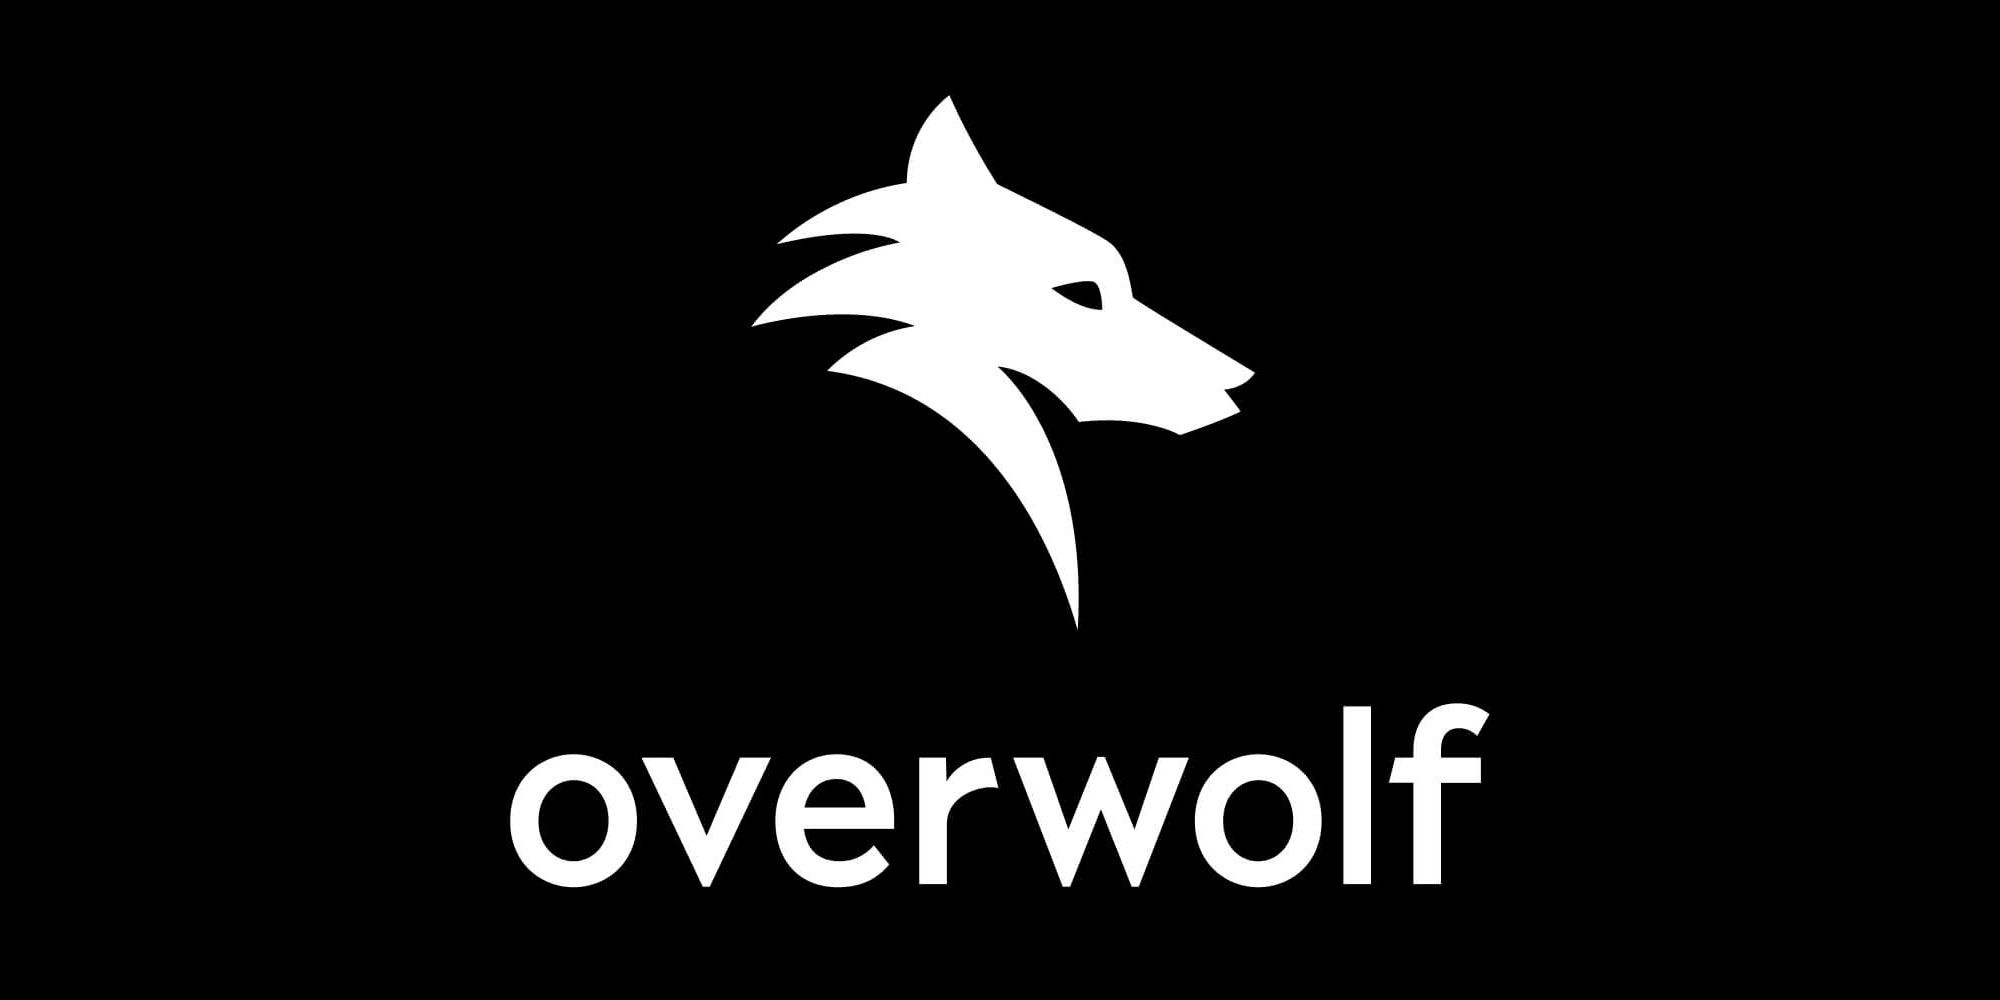 Logo for League of Legends companion app Overwolf featuring a wolf silhouette.